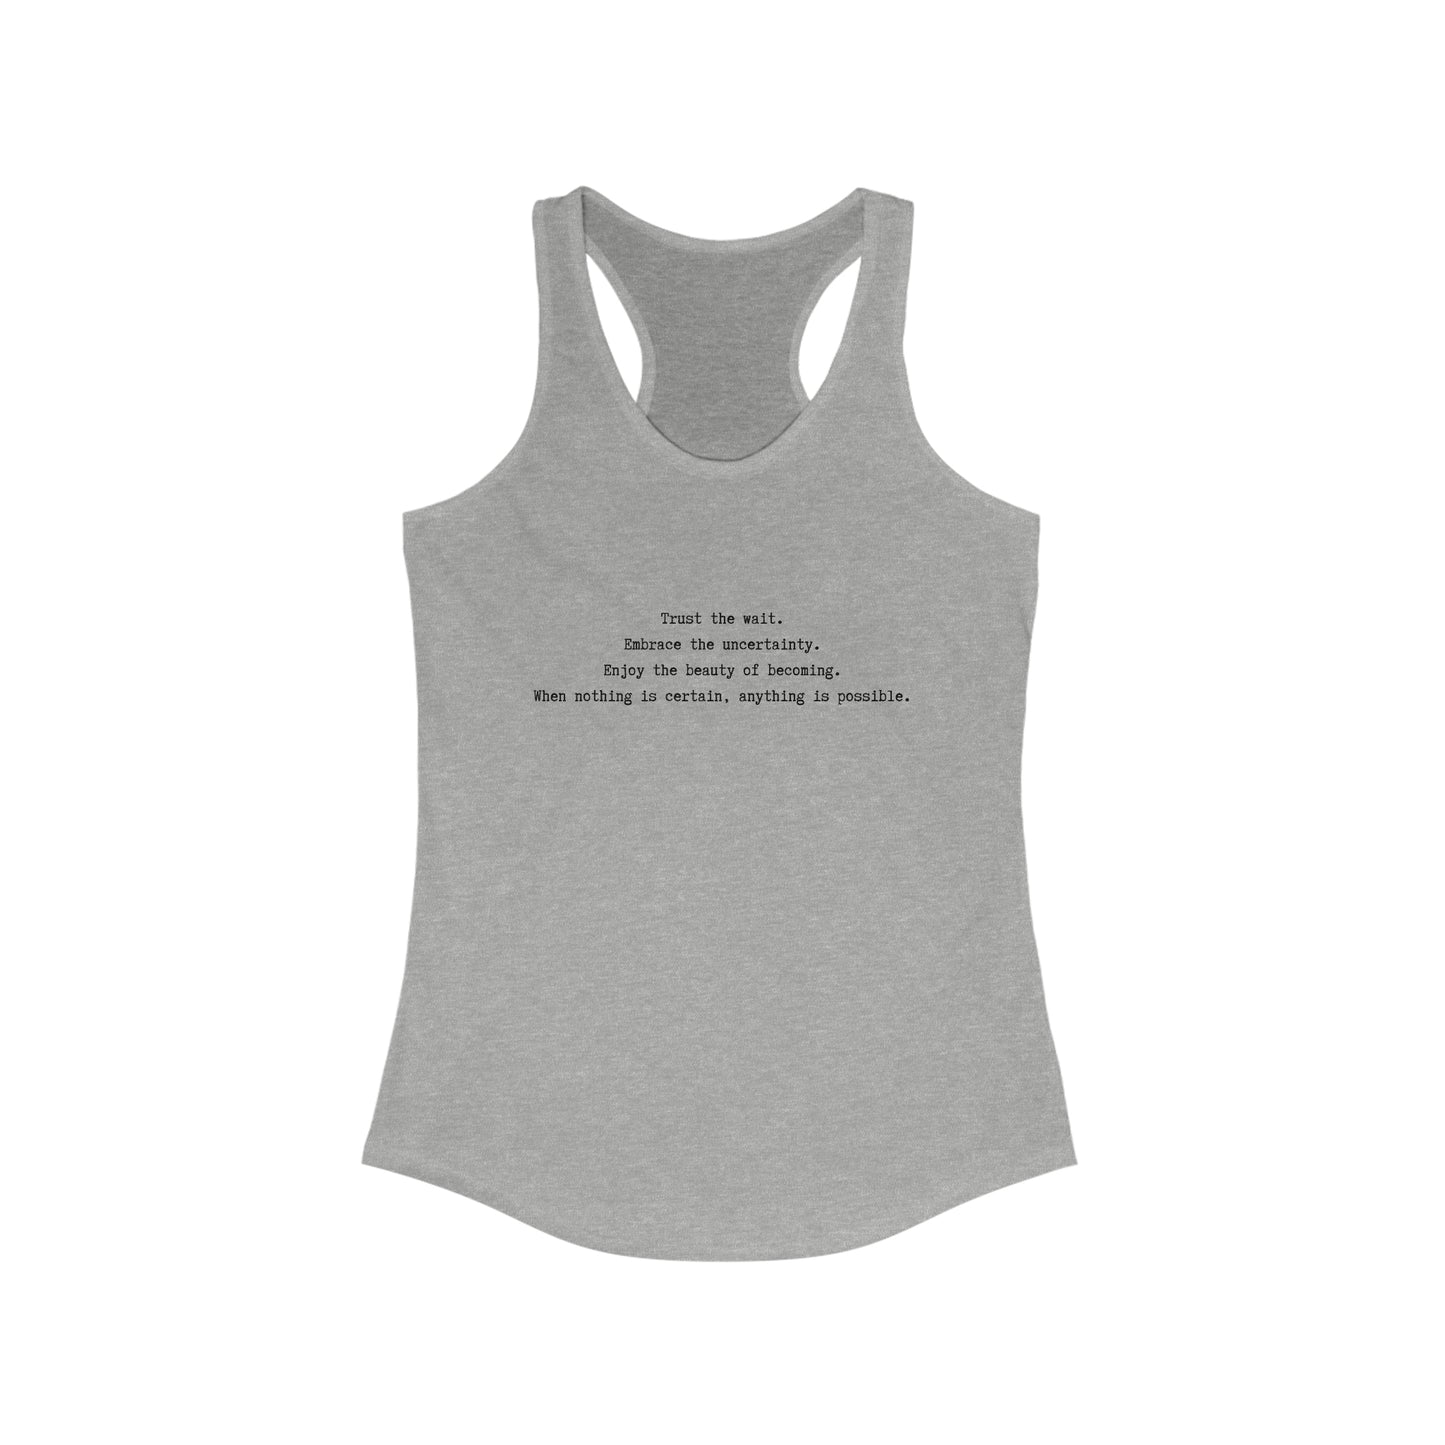 Anything is possible, Women's workout tank top